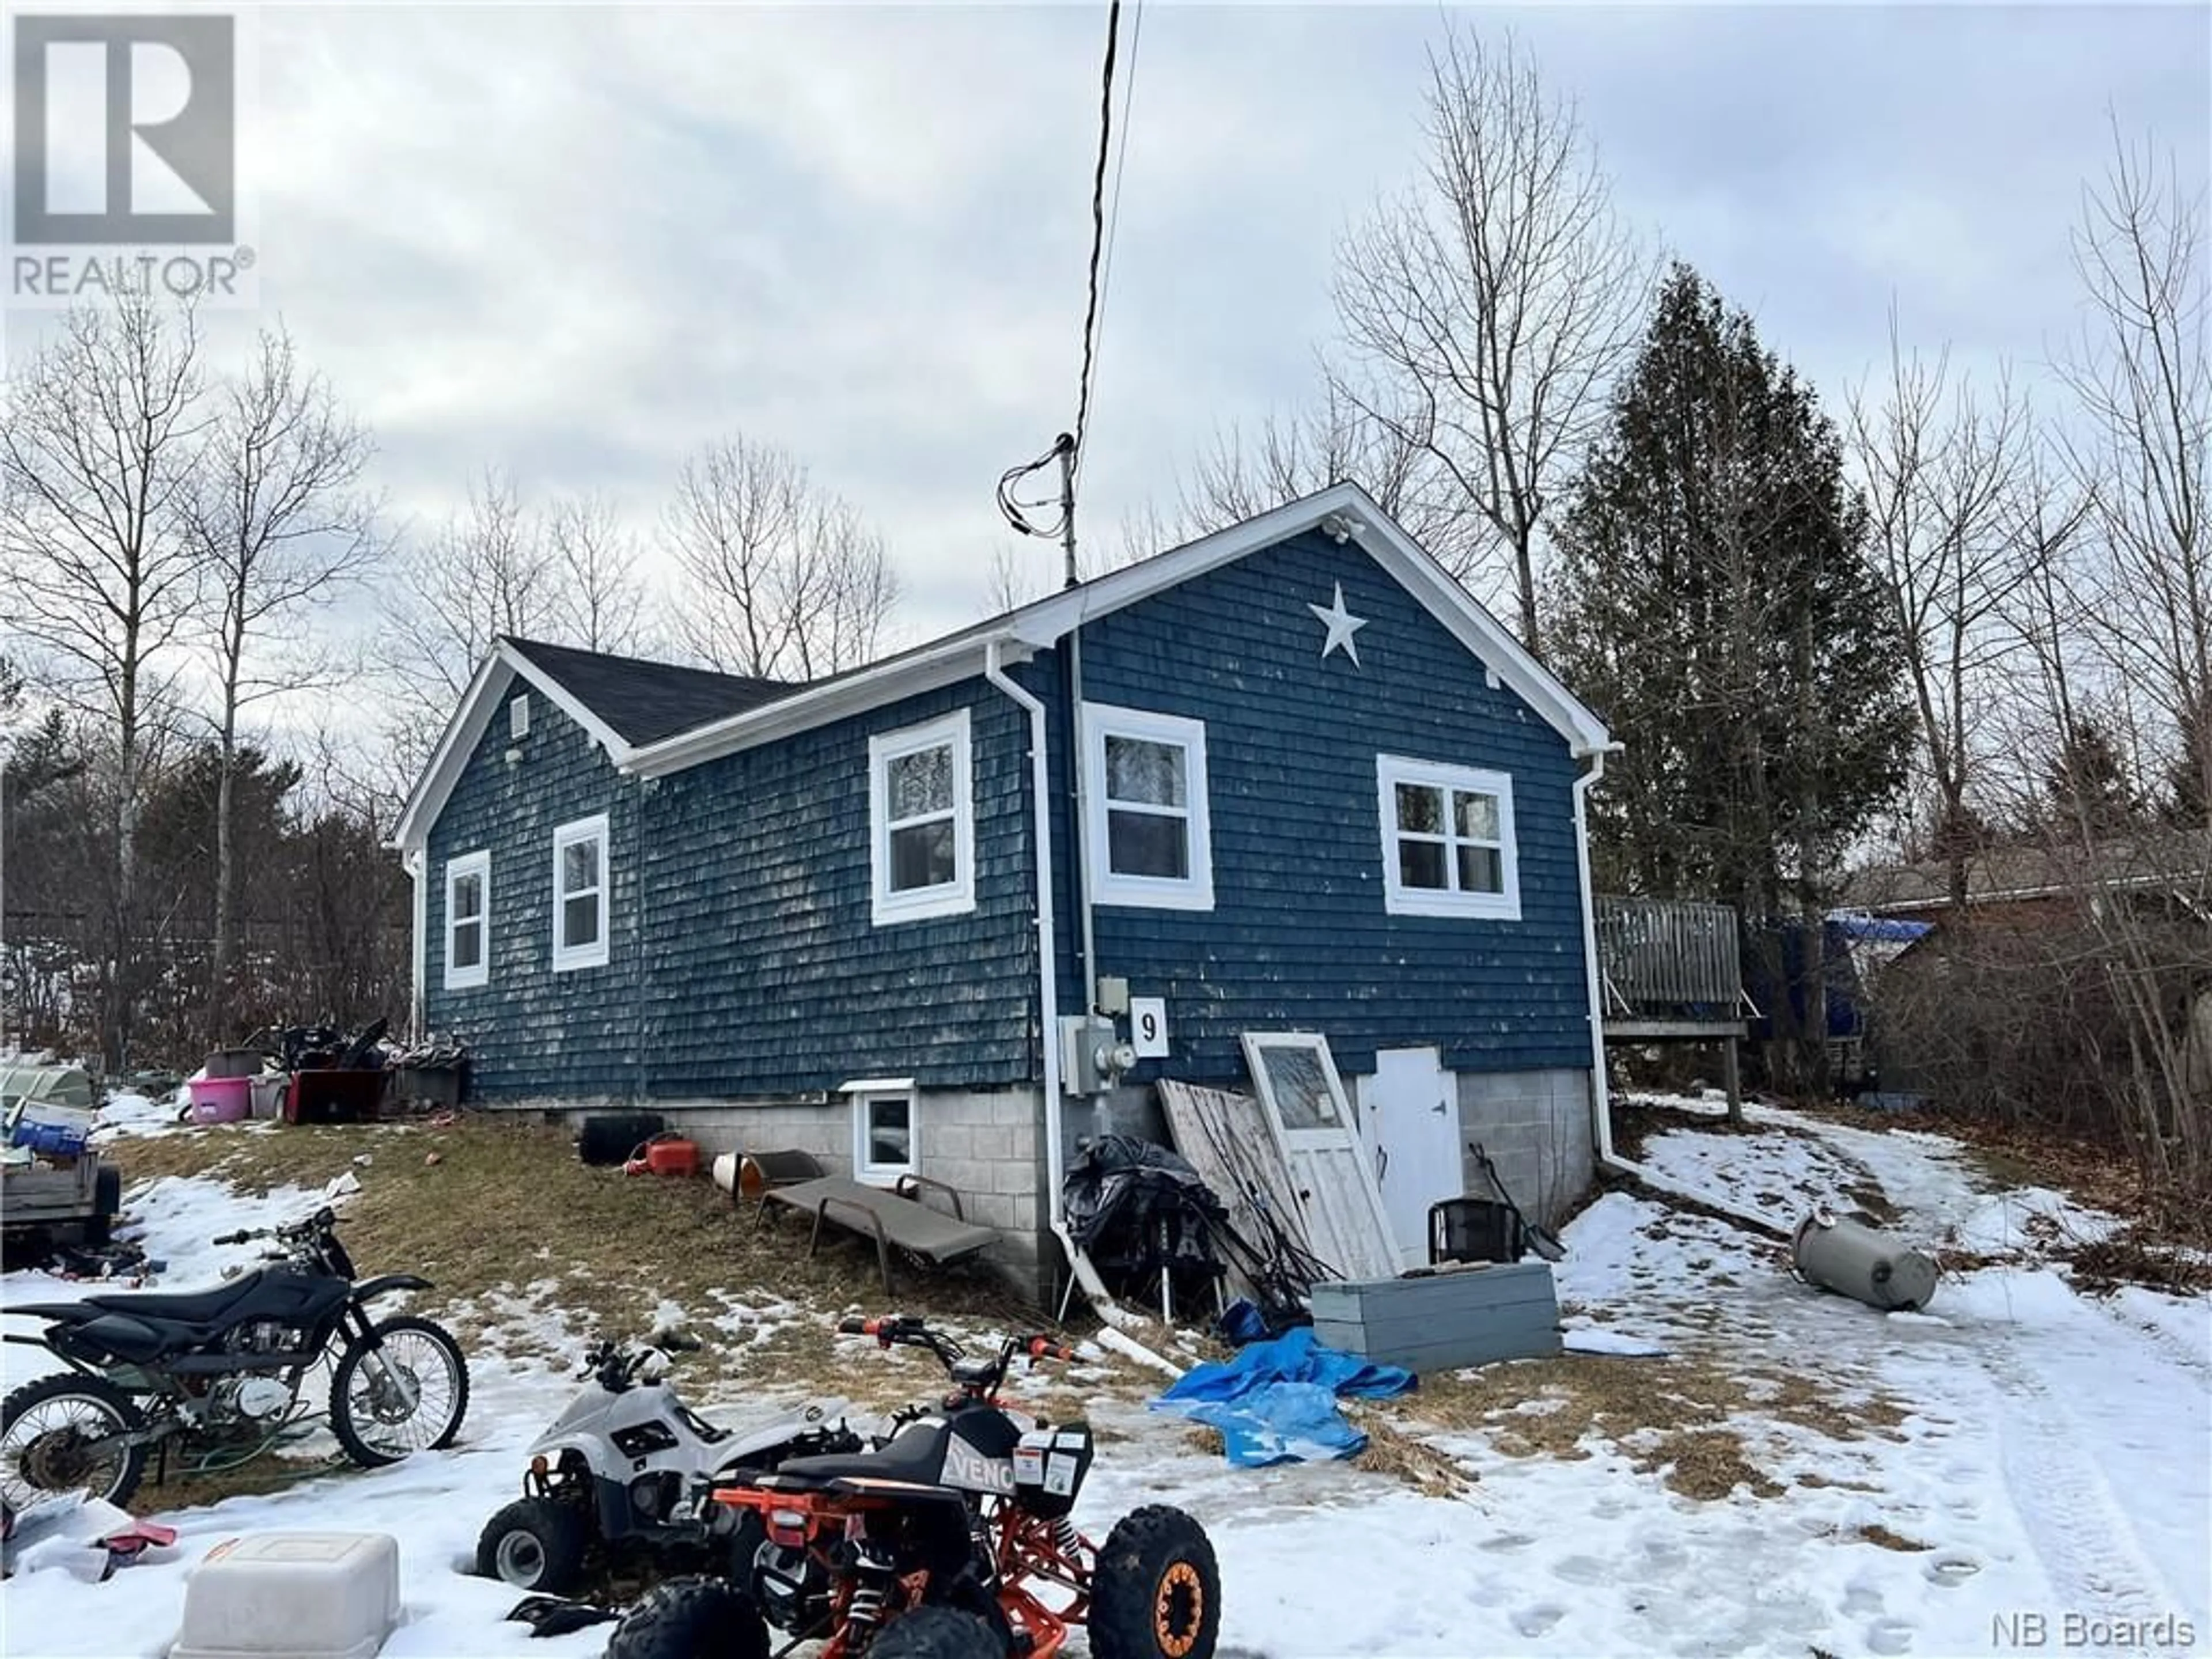 Home with unknown exterior material for 9 Bayview Road, Grand Bay-Westfield New Brunswick E5K1K7